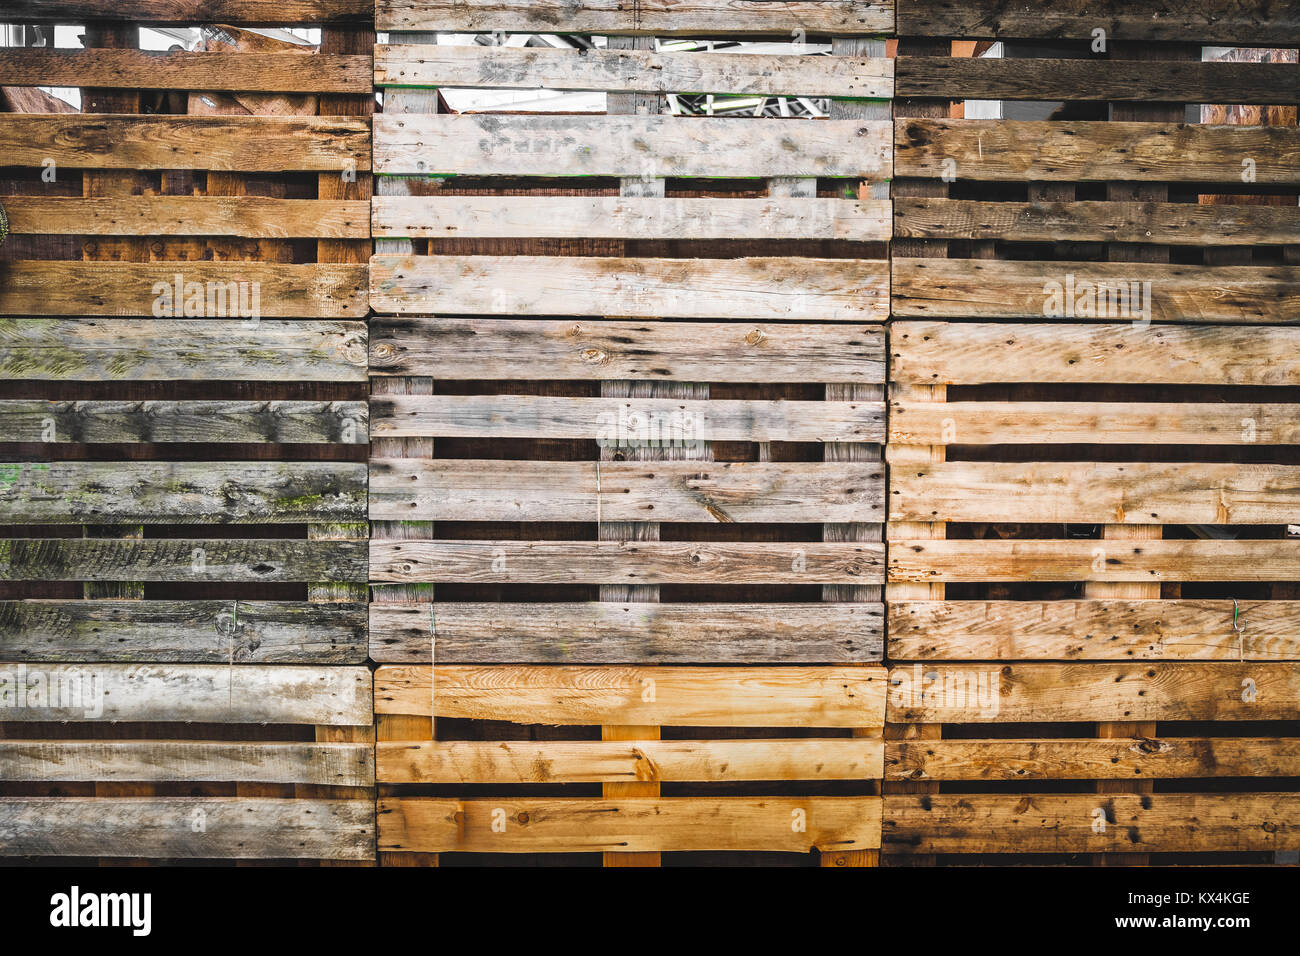 pallets texture grunge copy space wooden background warehouse wallpaper Stock Photo